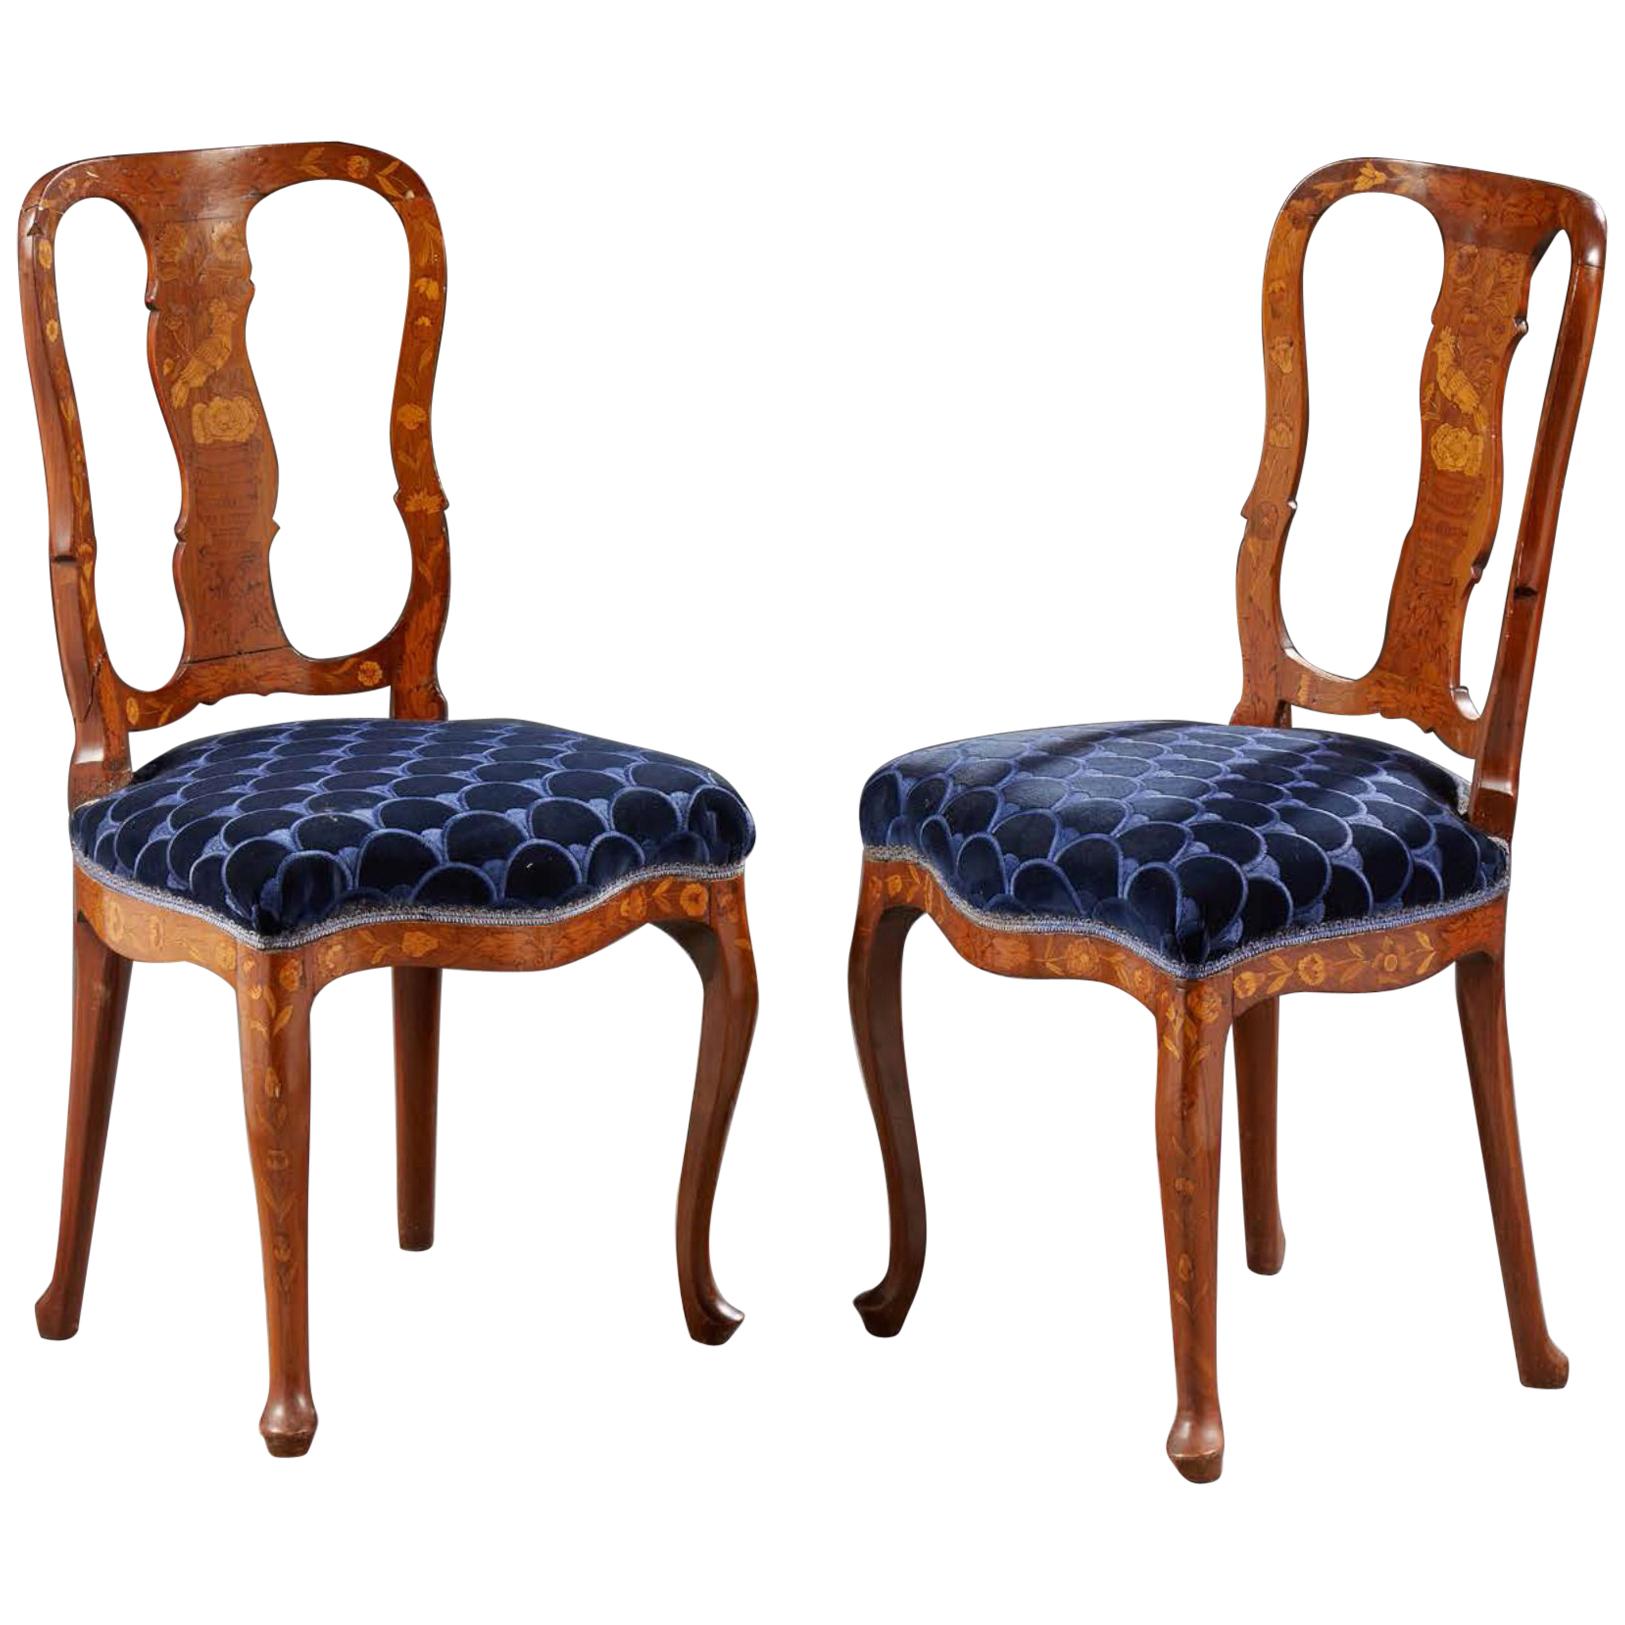 19th Century Pair of Dutch Inlaid Wood Chairs with Flower Motifs and Birds For Sale